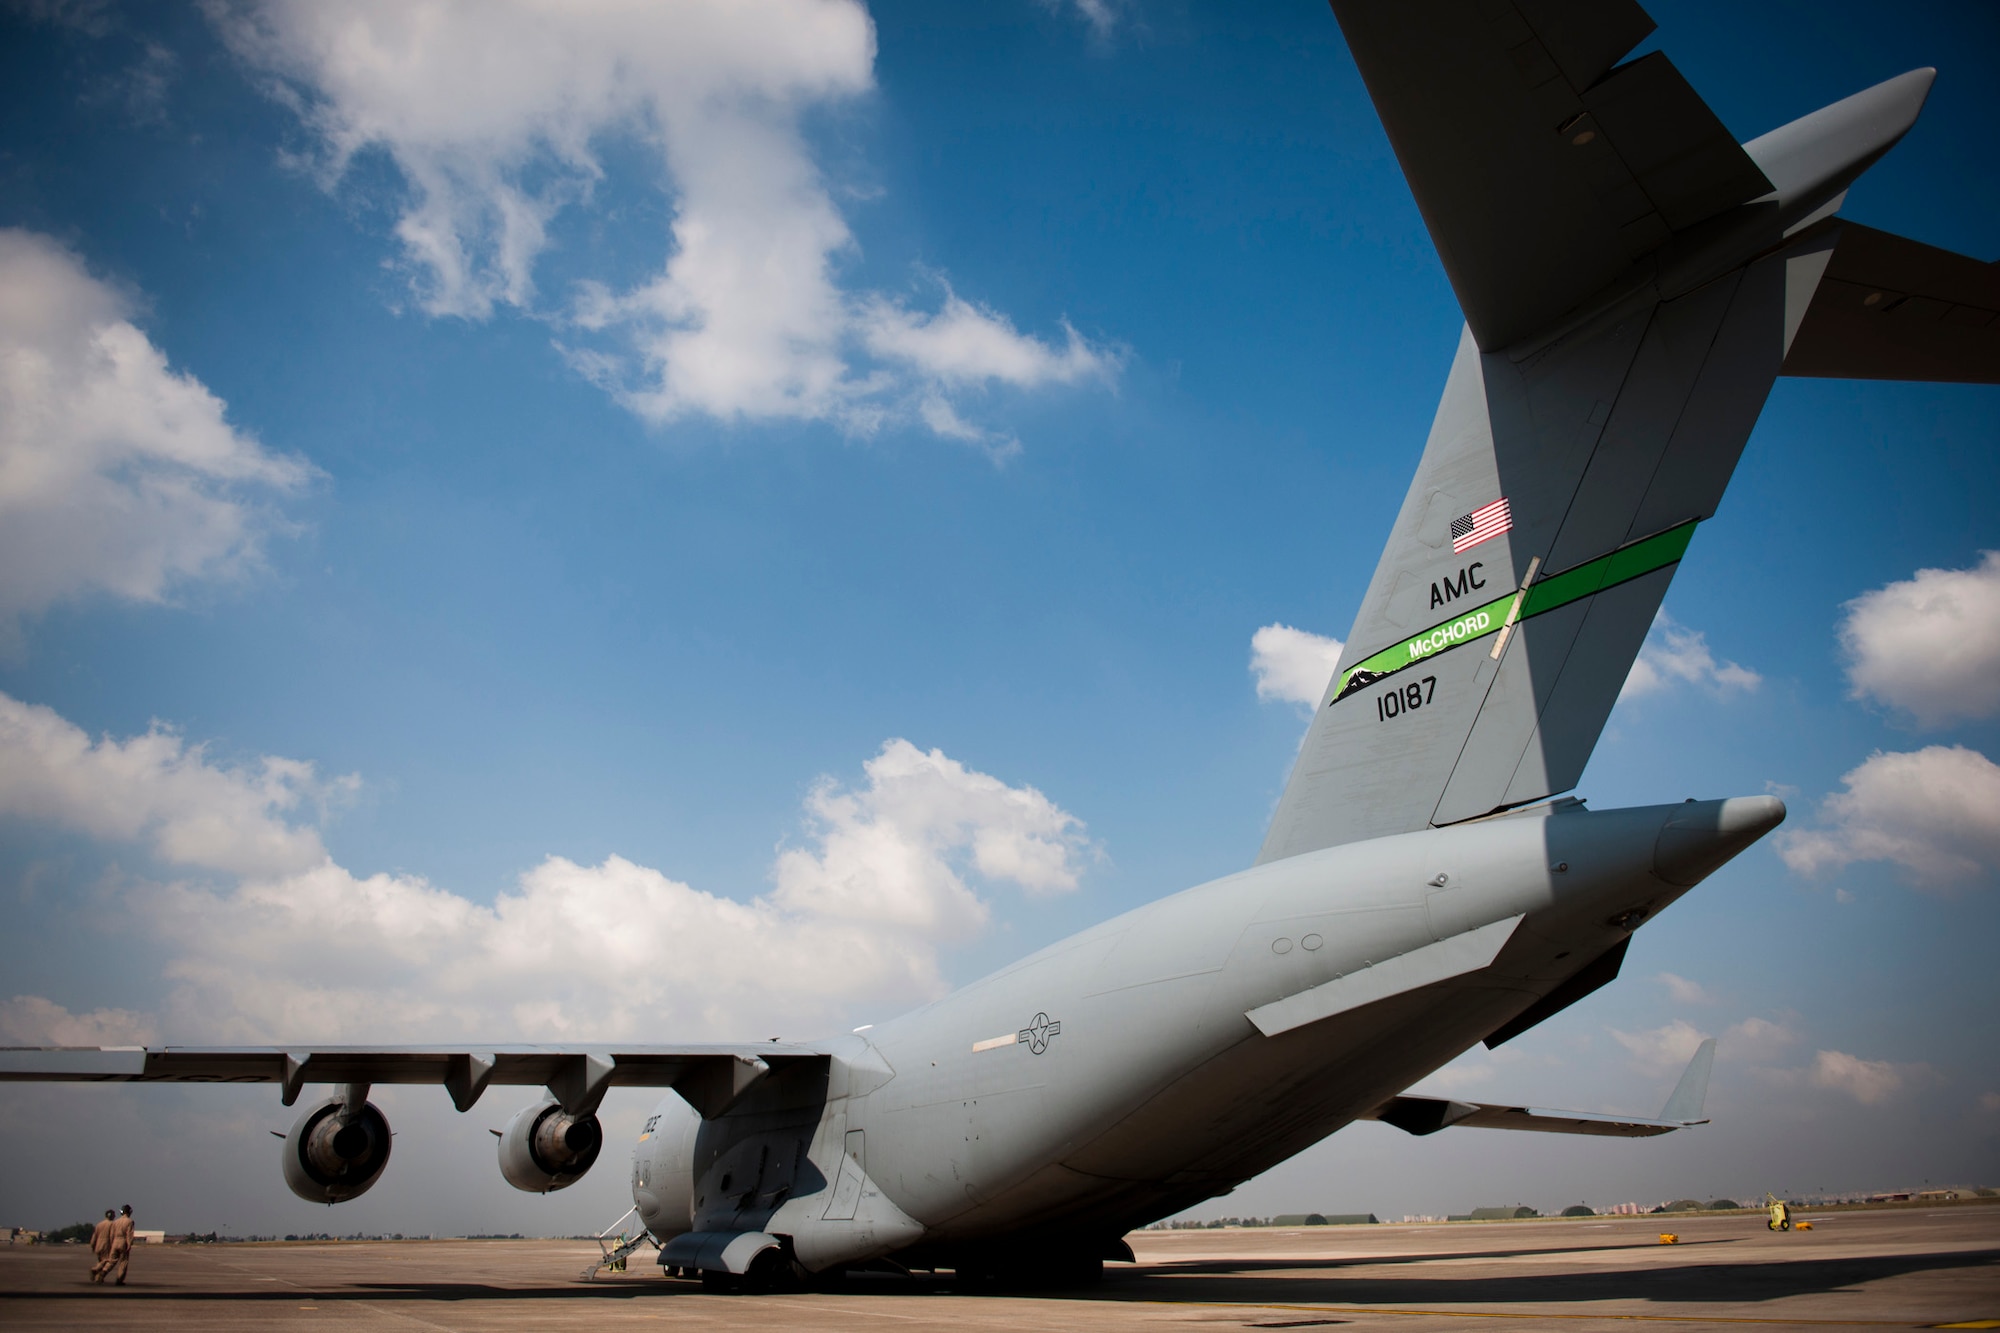 Capts. Matt Hammerle, left, and Eric Bowers, 817th Expeditionary Airlift Squadron pilots, inspect a C-17 Globemaster III aircraft before a flight Aug. 18, 2011, at Incirlik Air Base, Turkey. The crew transported equipment and supplies to Kandahar Air Field, Afghanistan. (U.S. Air Force photo by Tech. Sgt. Michael B. Keller/Released)